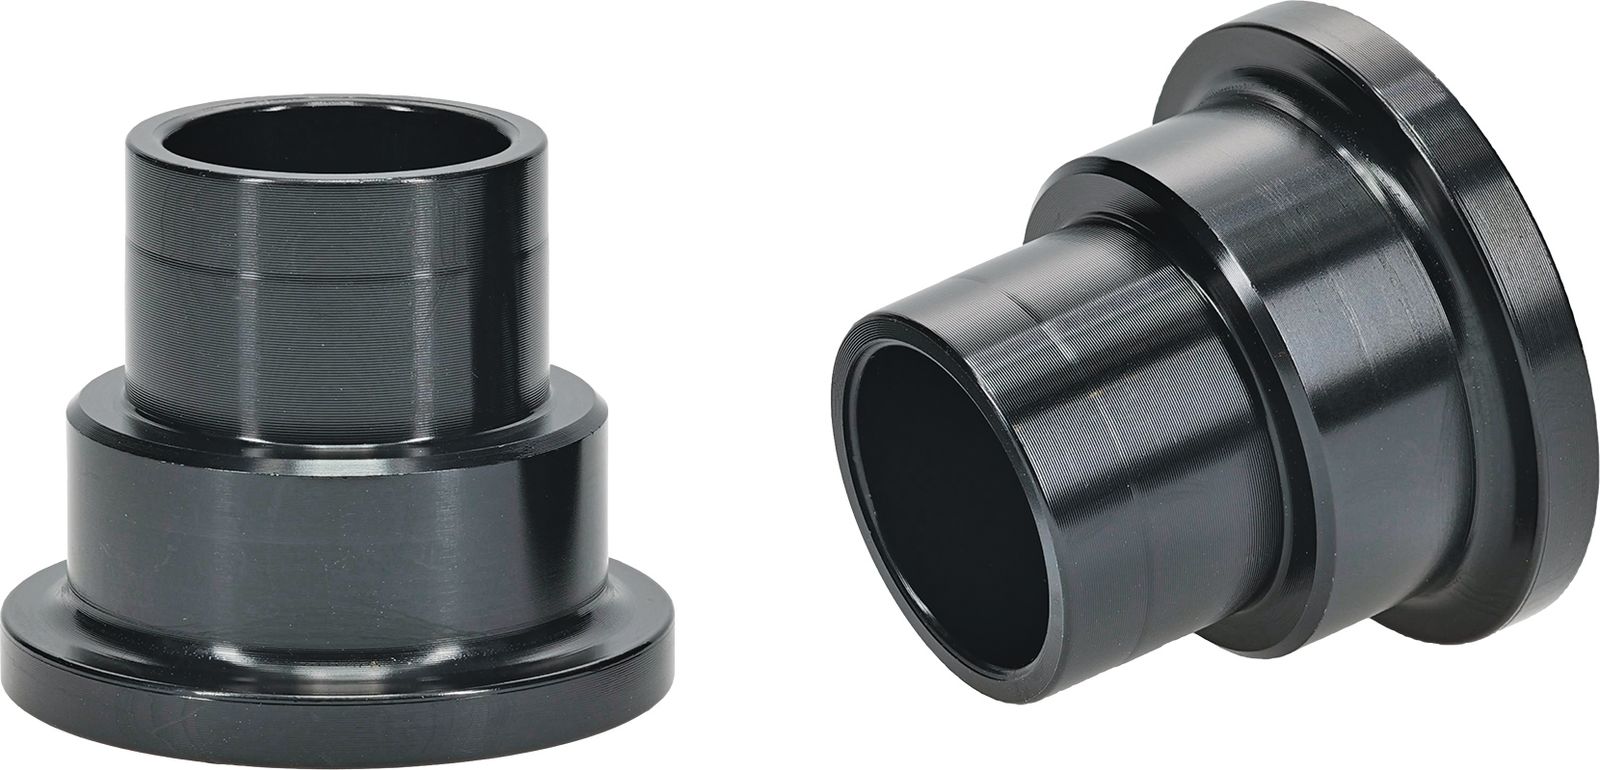 Wrp Rear Wheel Spacer Kits - WRP111084-1 image